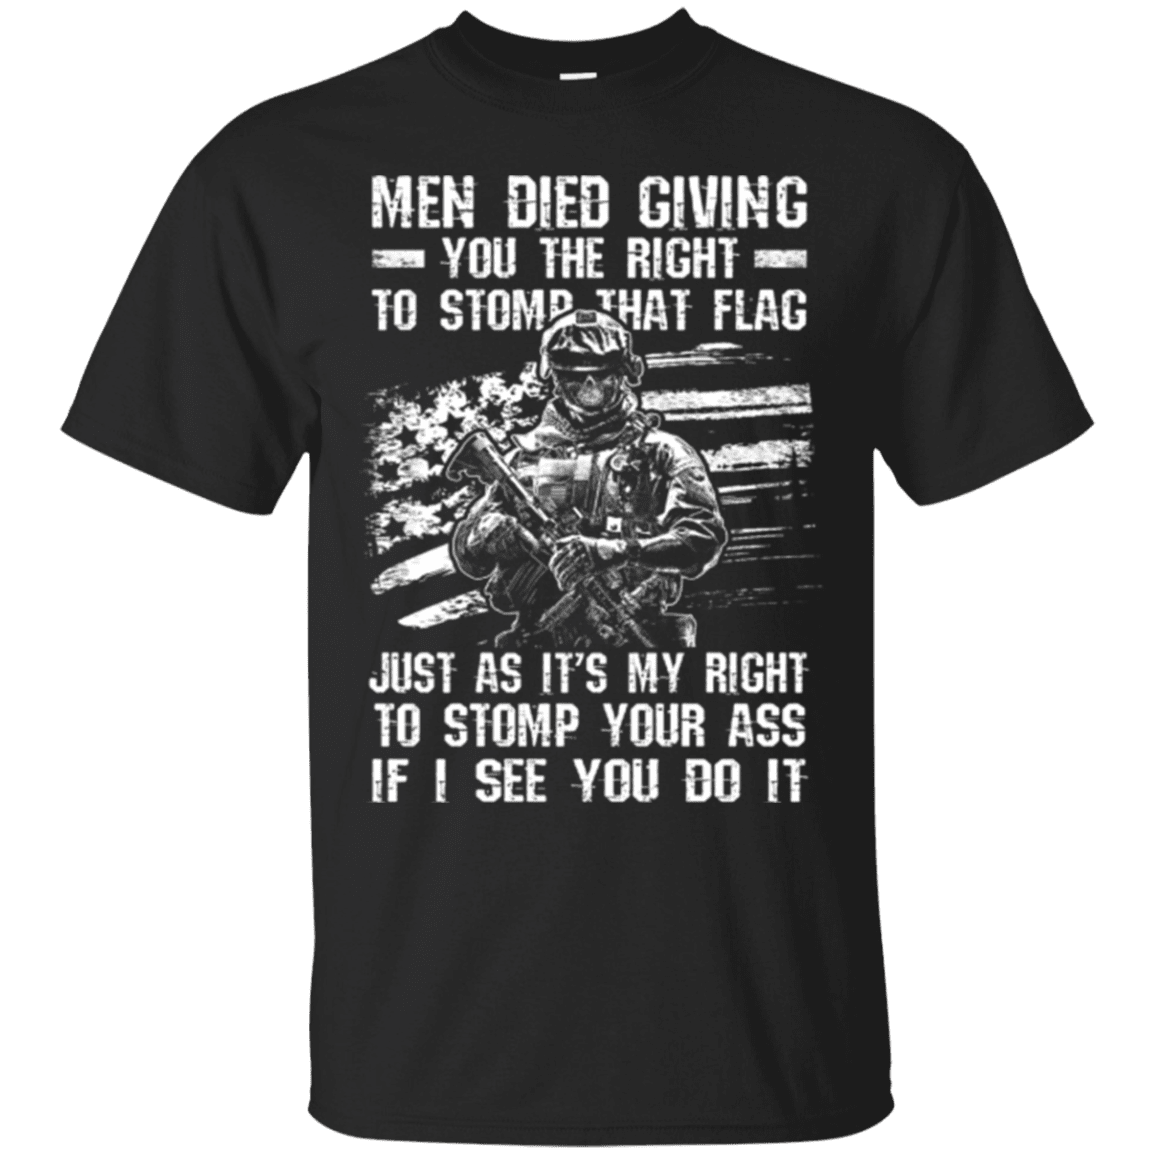 Military T-Shirt "Men Died Giving You The Right To Stomp That Flag"-TShirt-General-Veterans Nation